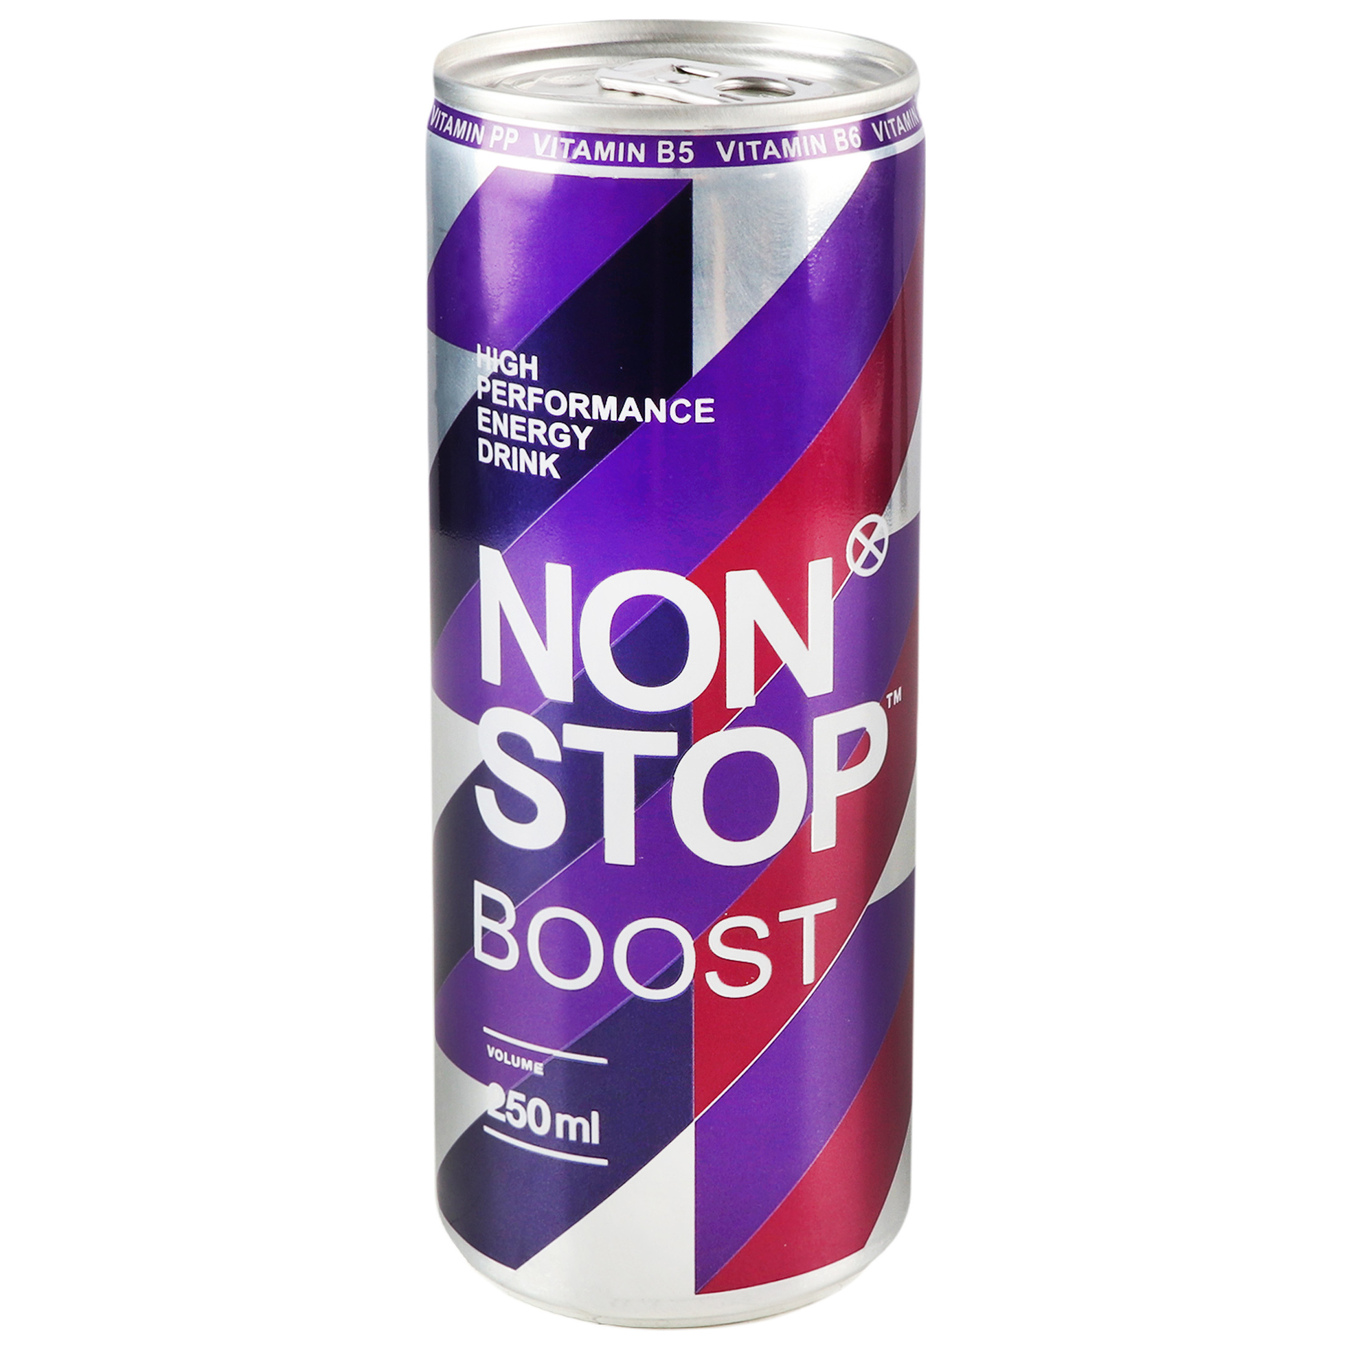 Non-Stop BOOST energy drink iron can 0.25 l 3